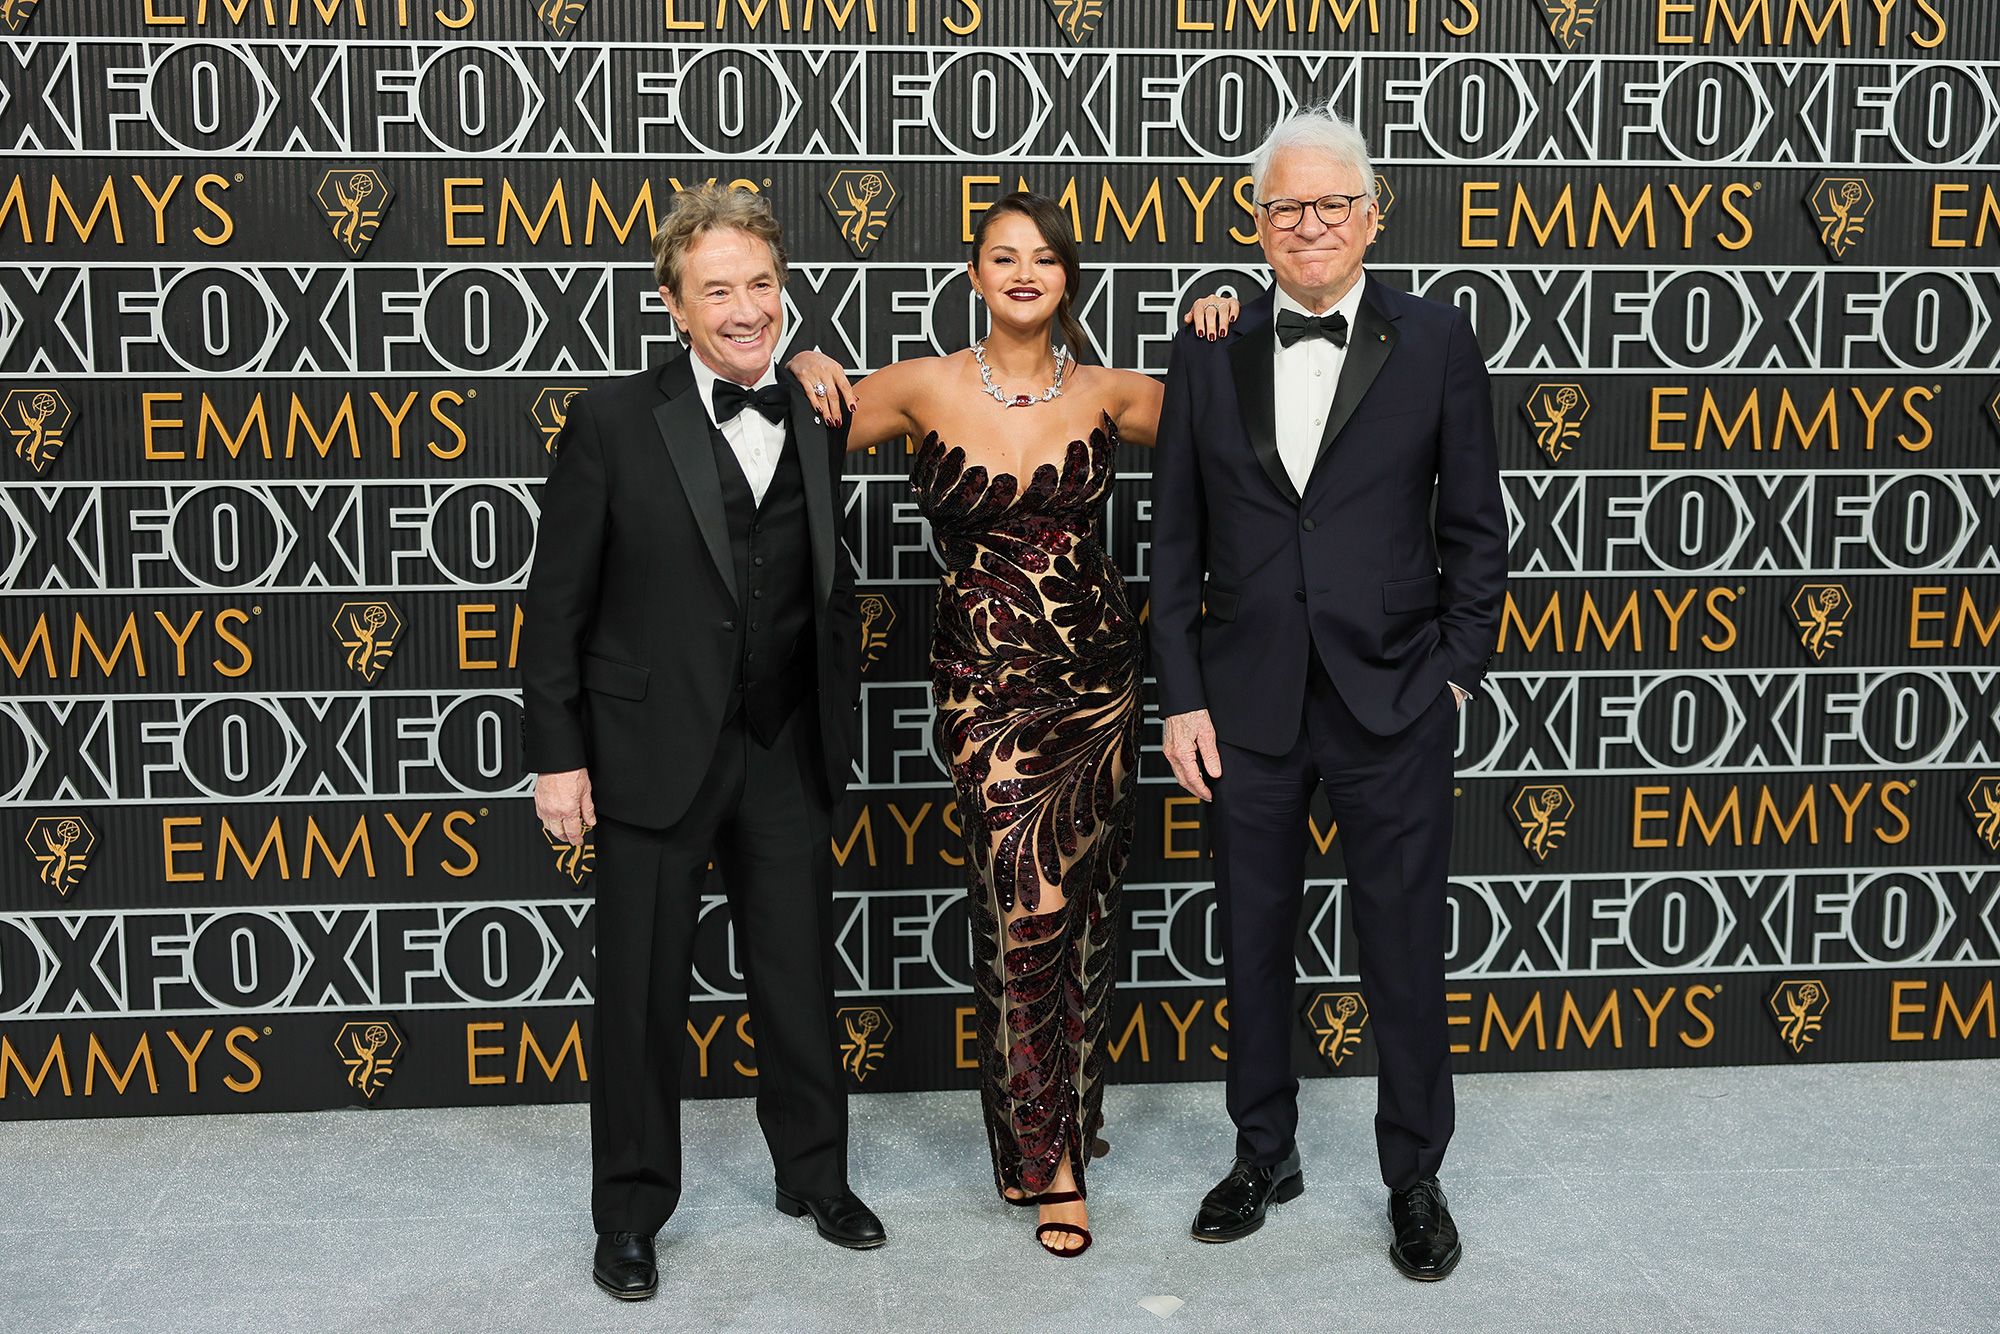 Martin Short and Steve Martin pose either side of their “Only Murders in the Building” co-star Selena Gomez, who wore Oscar de la Renta.